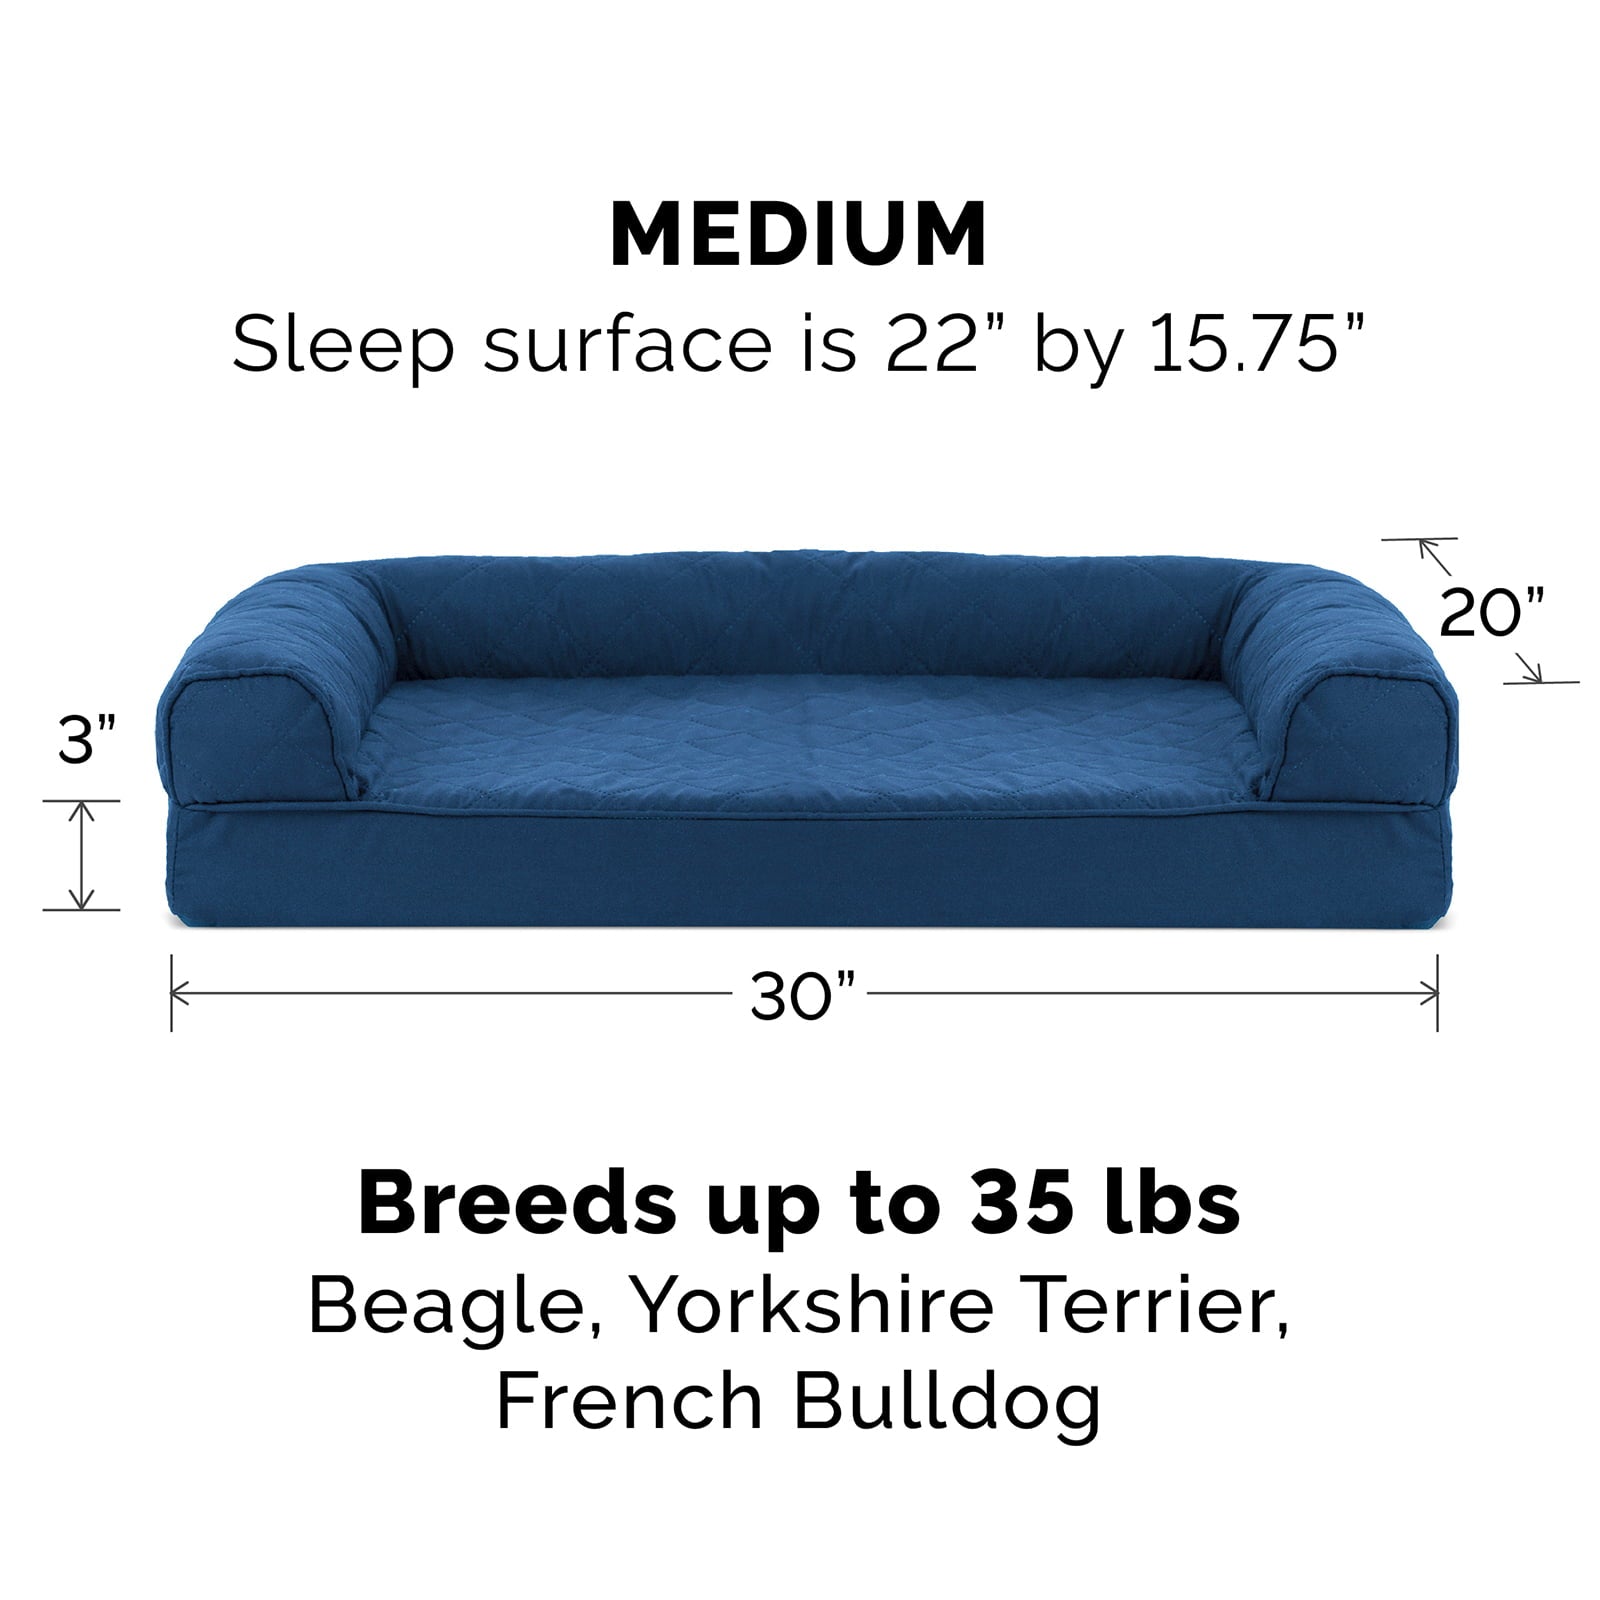 FurHaven | Orthopedic Quilted Sofa Pet Bed for Dogs and Cats， Navy， Medium